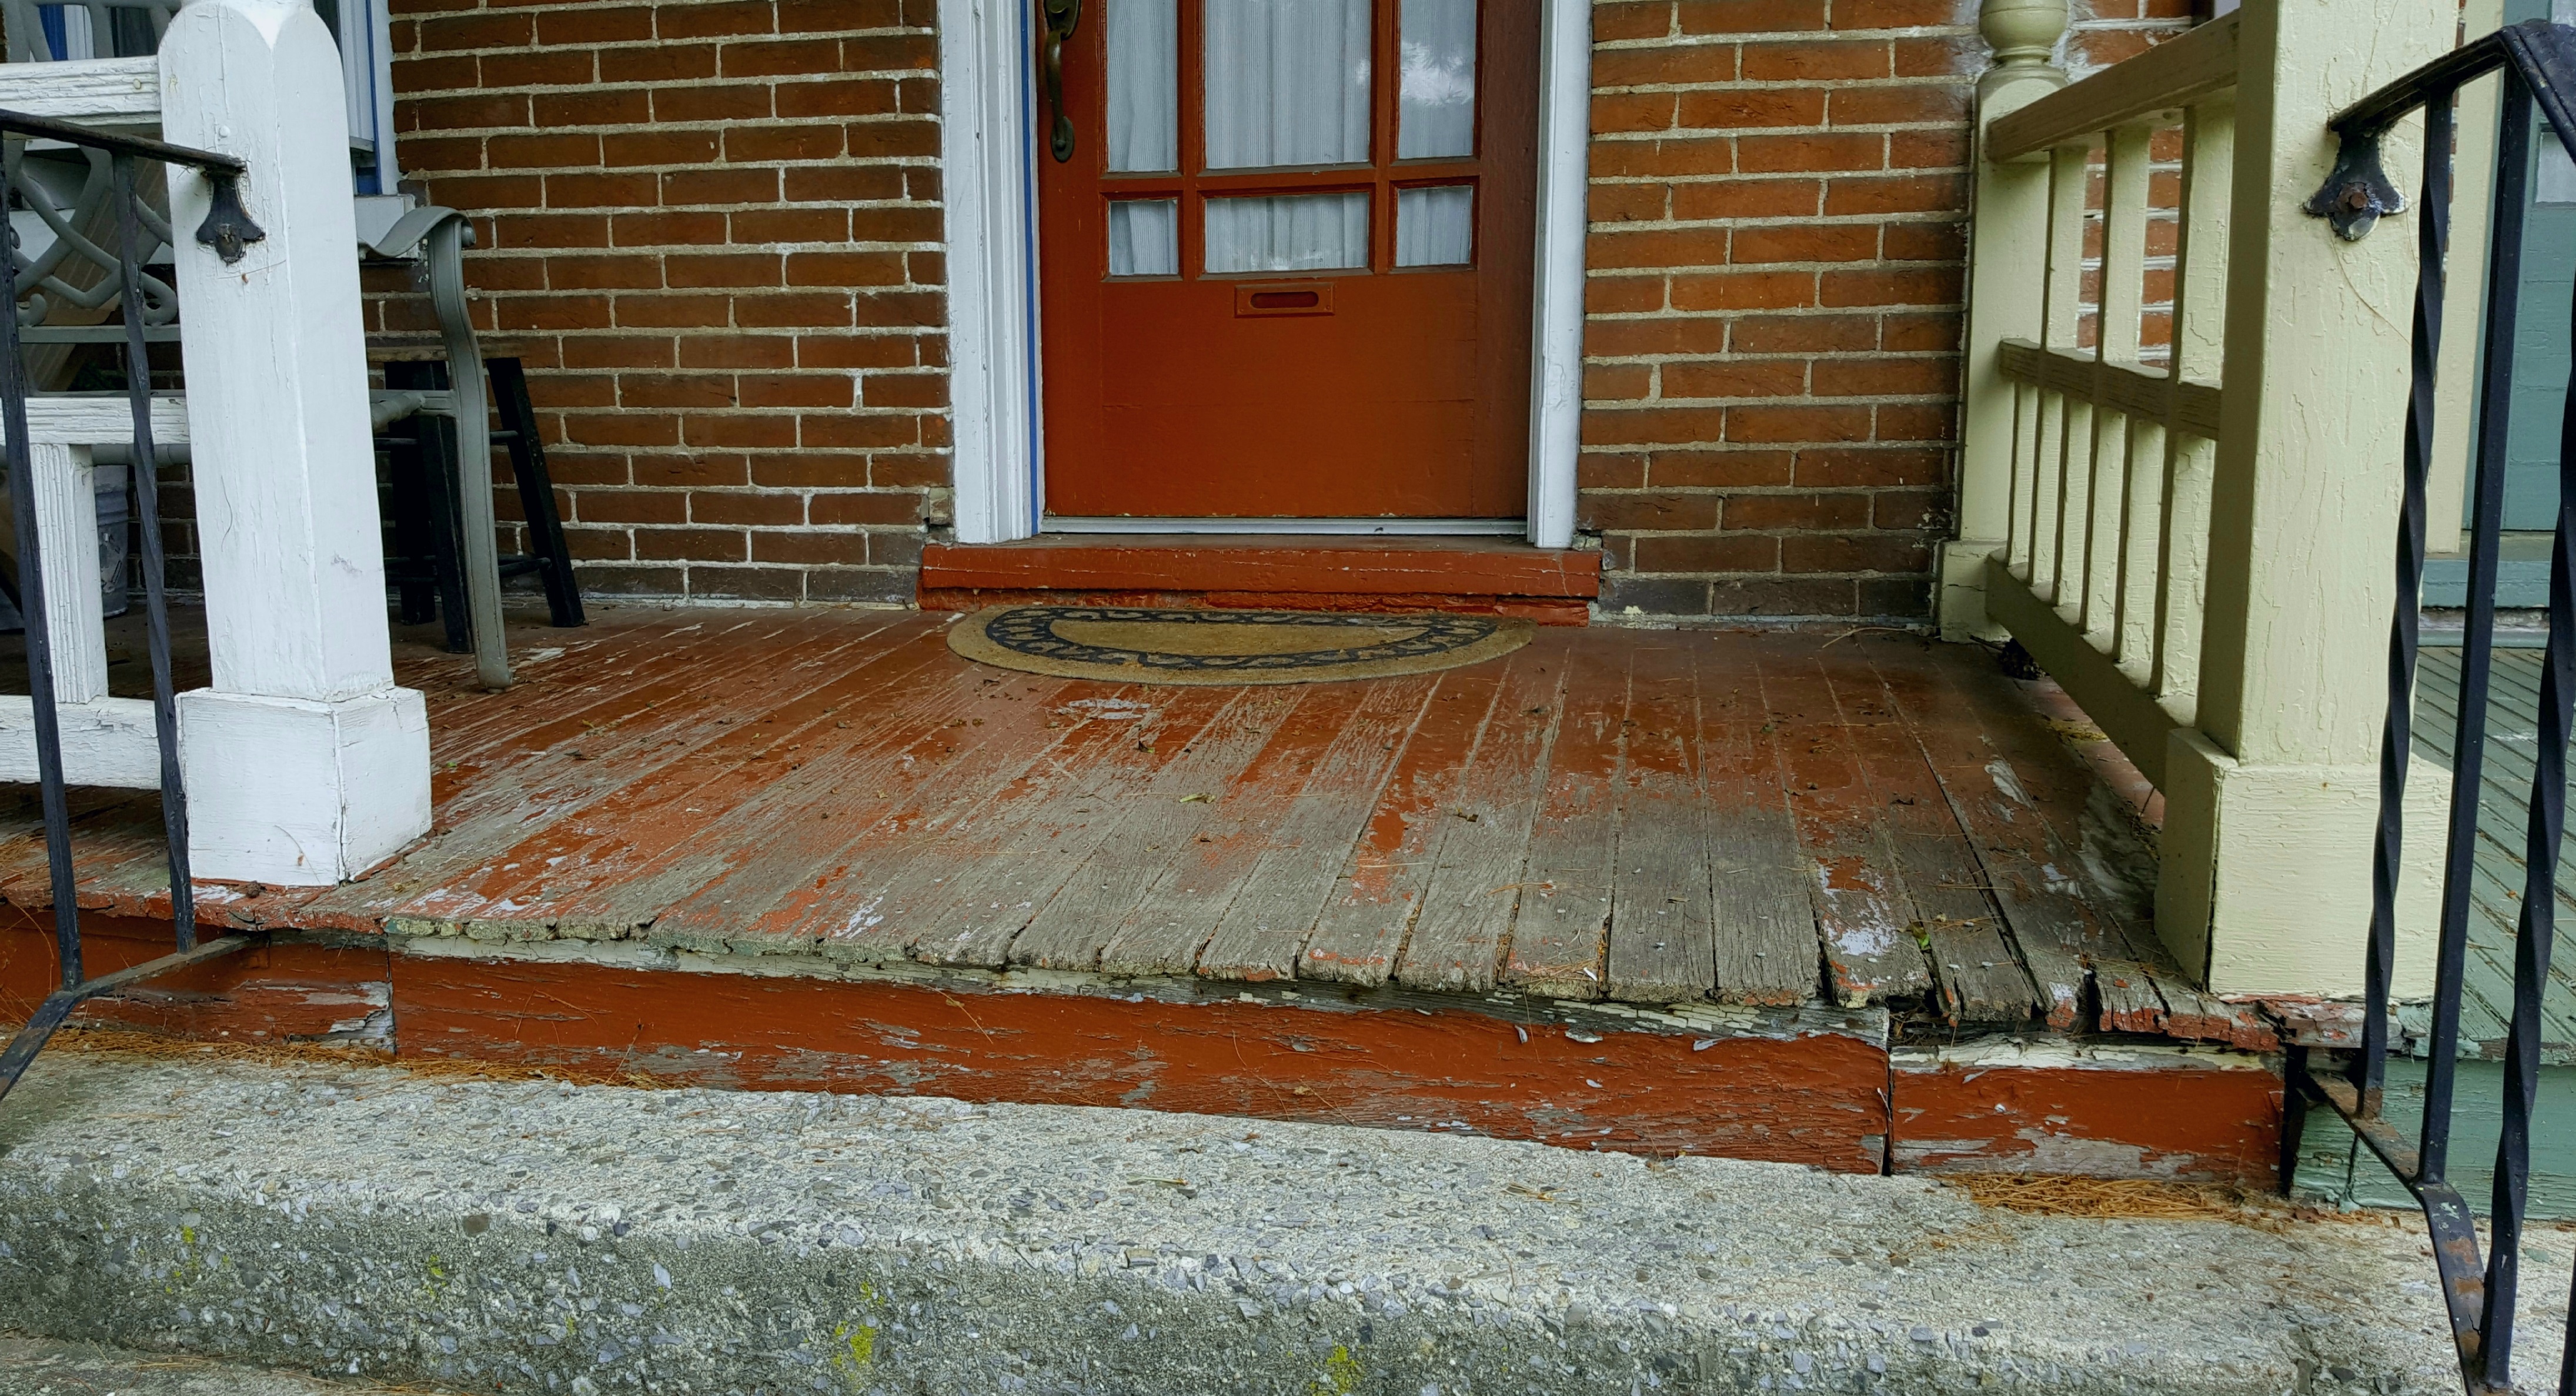 This front porch would regain its charm with a few new boards and a fresh coat of paint.